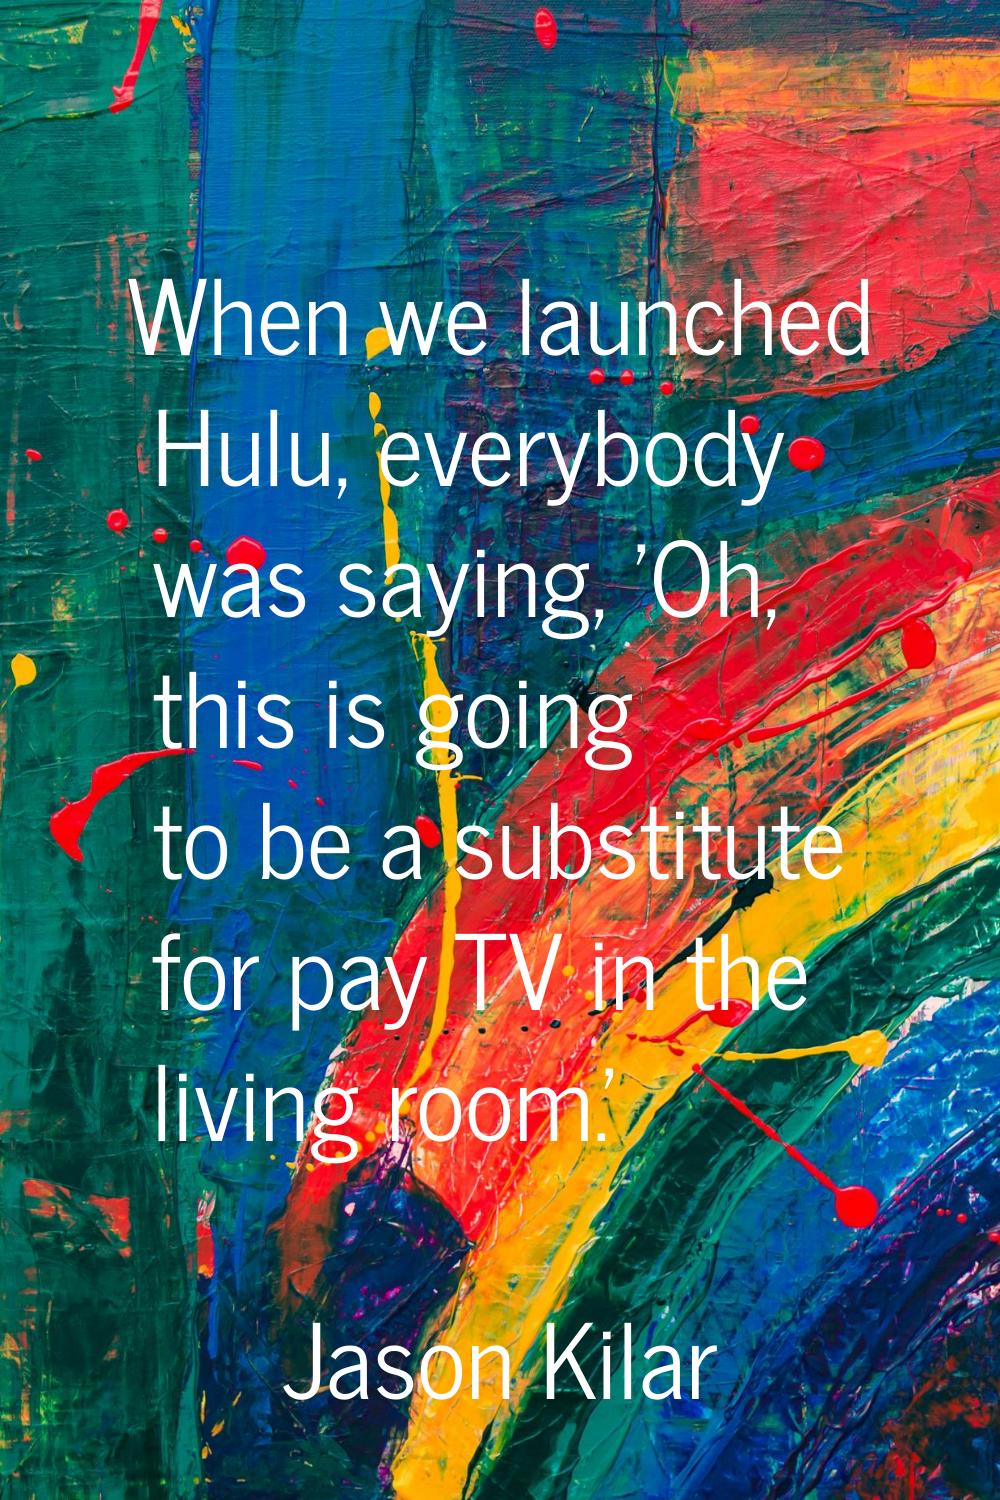 When we launched Hulu, everybody was saying, 'Oh, this is going to be a substitute for pay TV in th